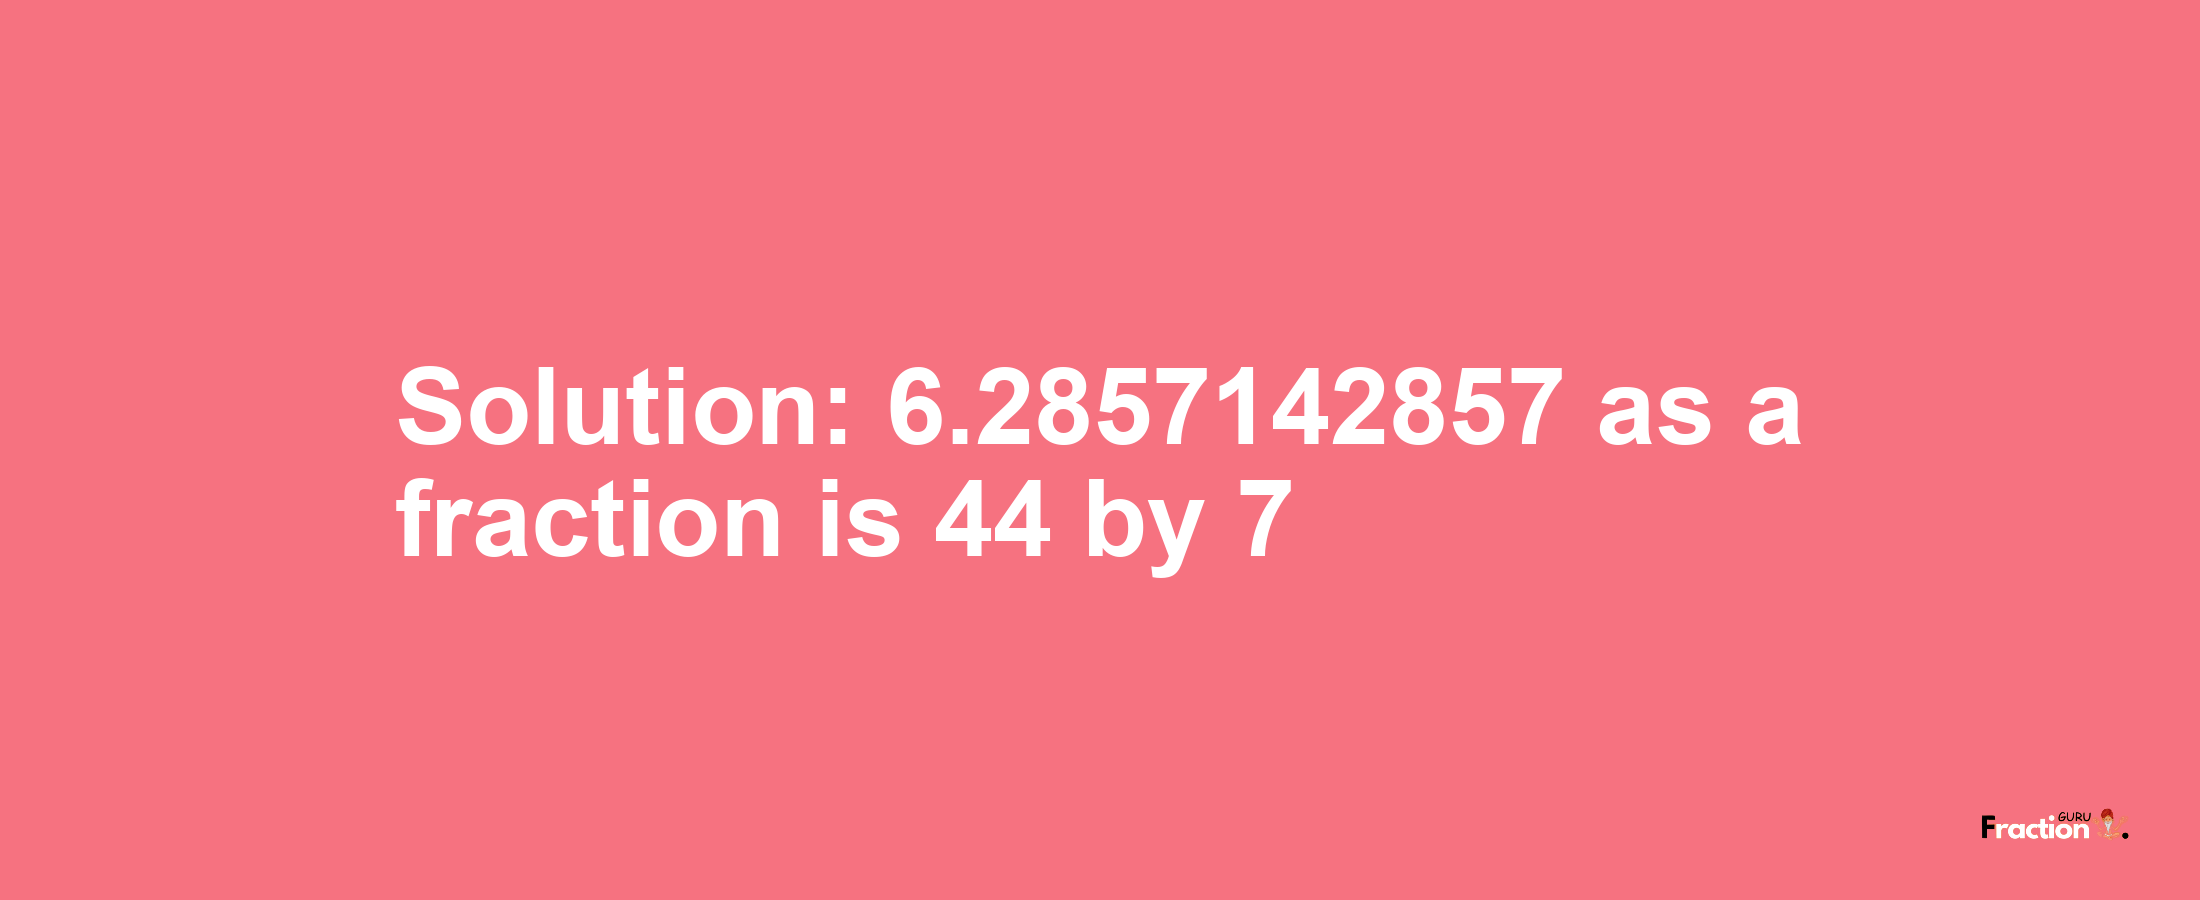 Solution:6.2857142857 as a fraction is 44/7